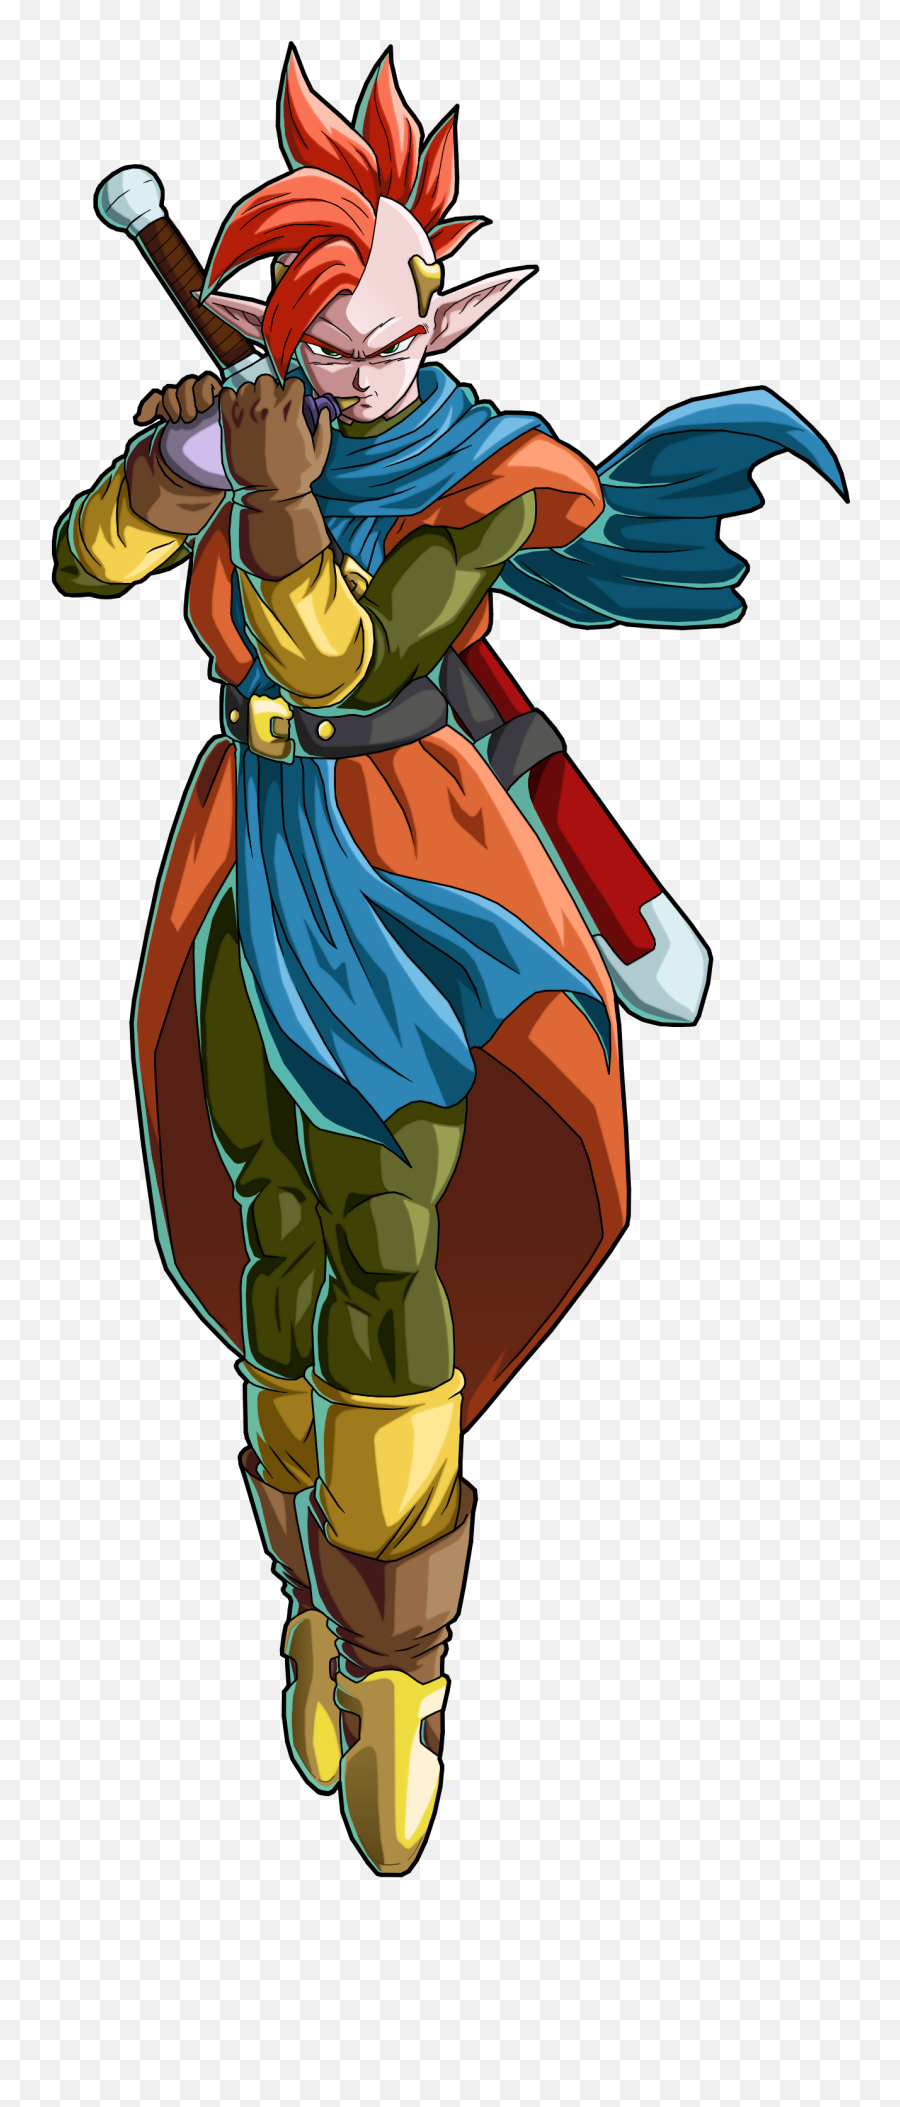 Tapion Joins The Fight Dbfz - Style Mockup Ui Tapion Dragon Ball Fighterz Png,Dragon Ball Fighterz Png